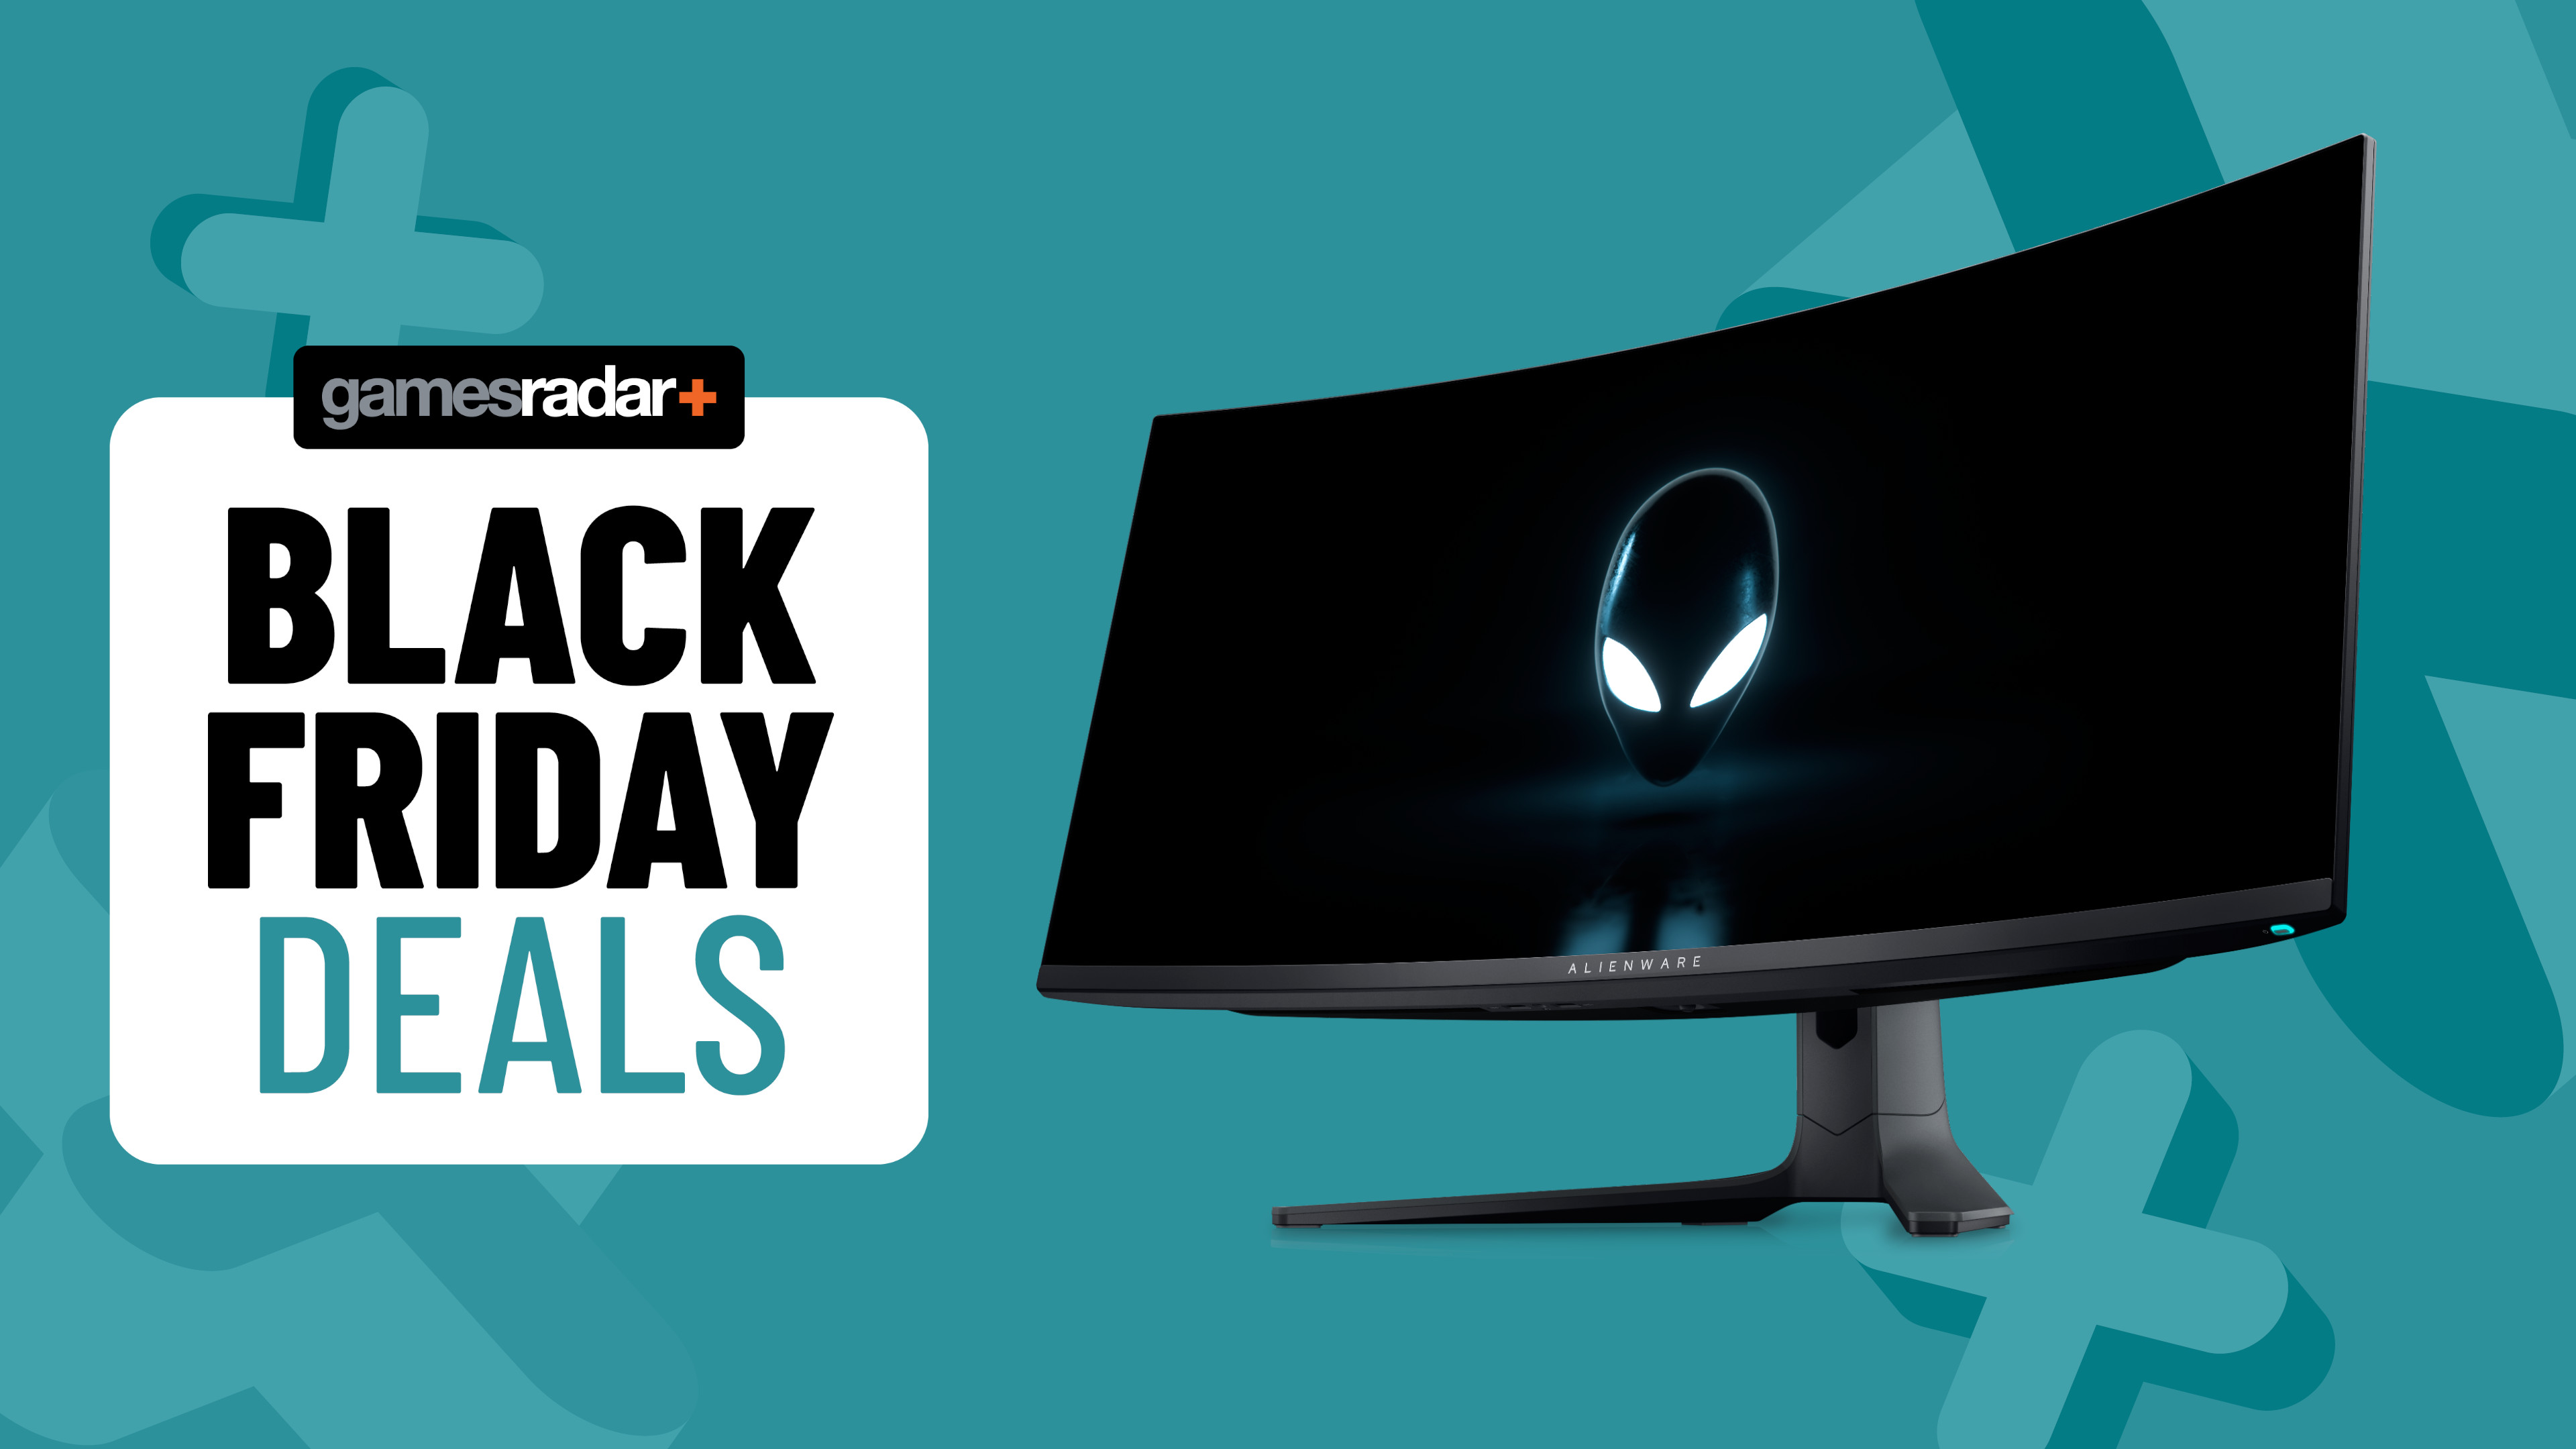 Best Prime Day monitor deals: 22 discounts still available on ultrawide,  gaming, and portable displays